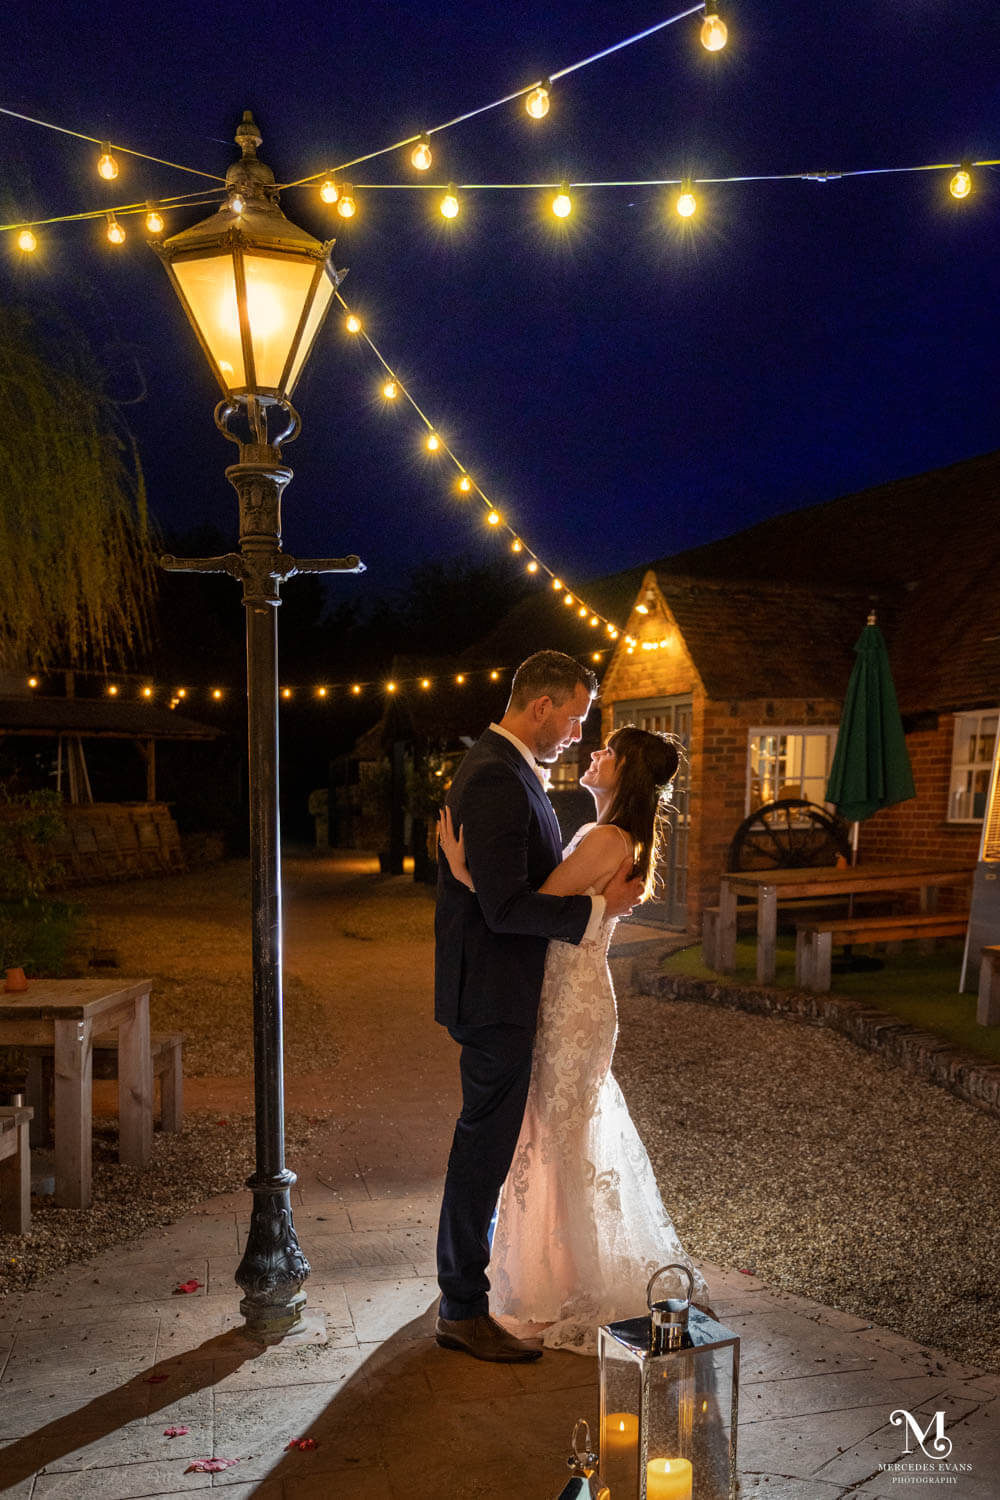 The bride and groom embrace beneath the vintage street light